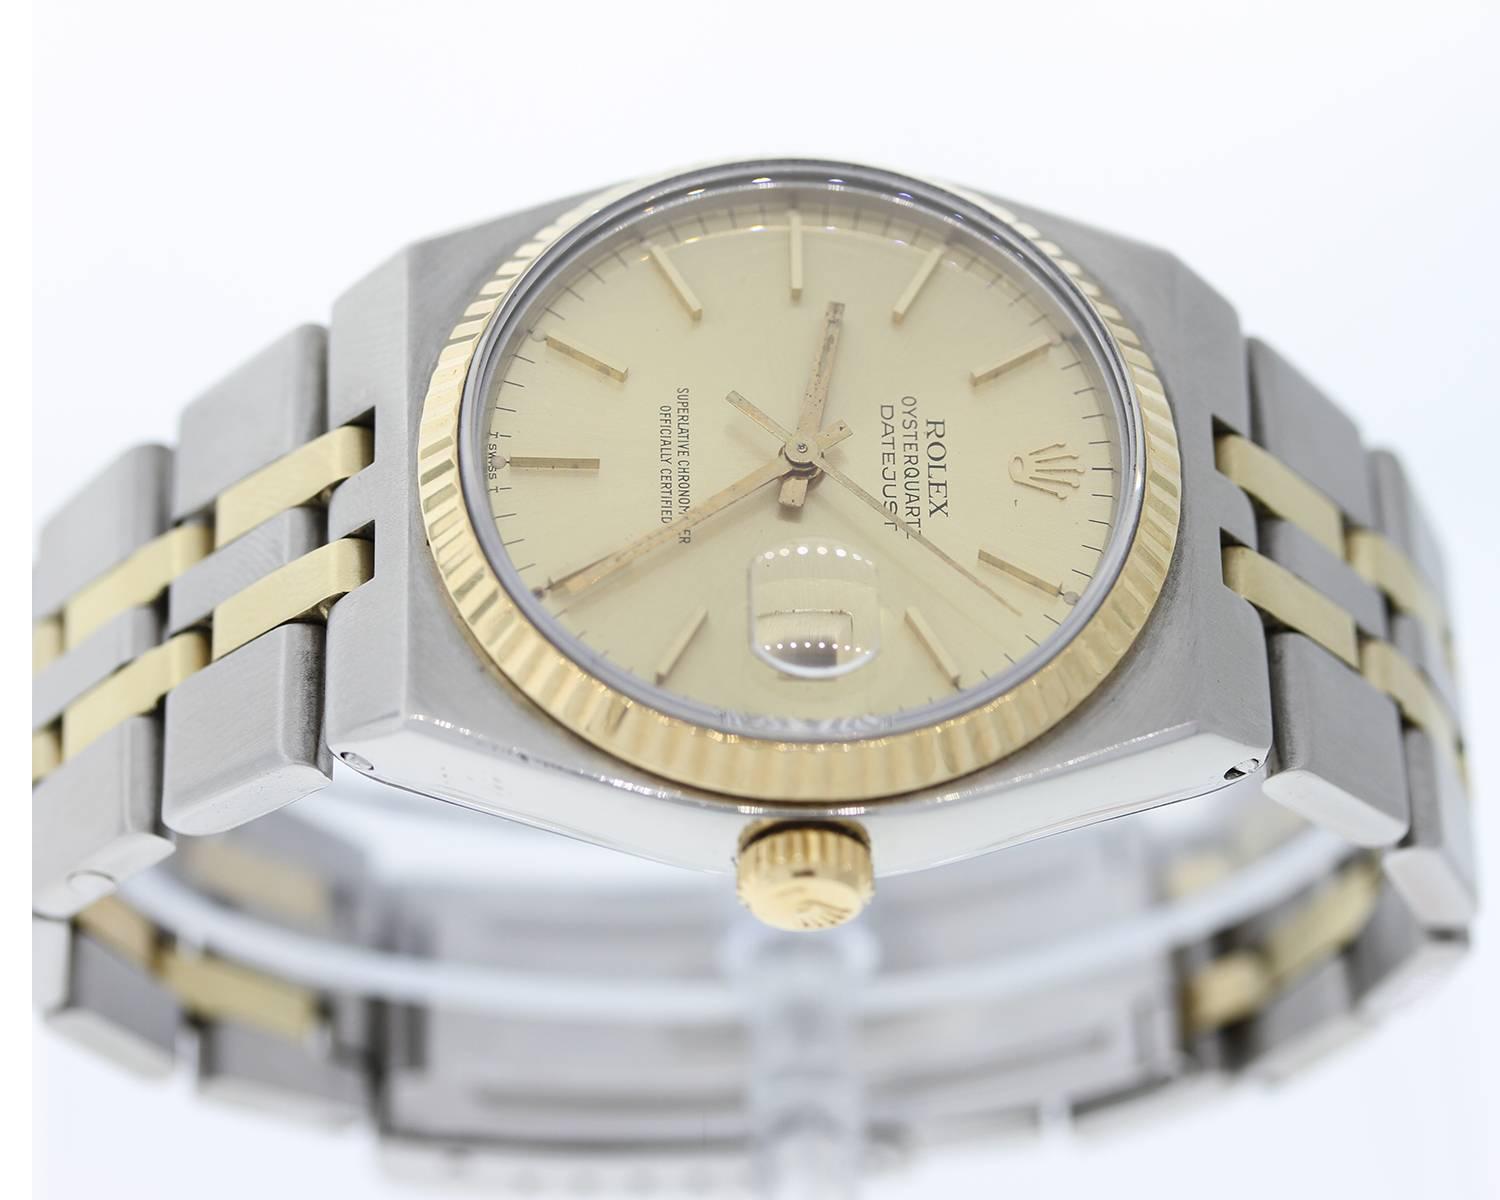 Brand Name: Rolex
Style Number: 31035
Style Name: Oyster Quartz
Color Name (Dial): Champagne with Gold Index Markers
Country of Manufacture: Switzerland
Gender: Unisex
Strap Material: Stainless Steel/18K Yellow Gold
Case Metal: Stainless